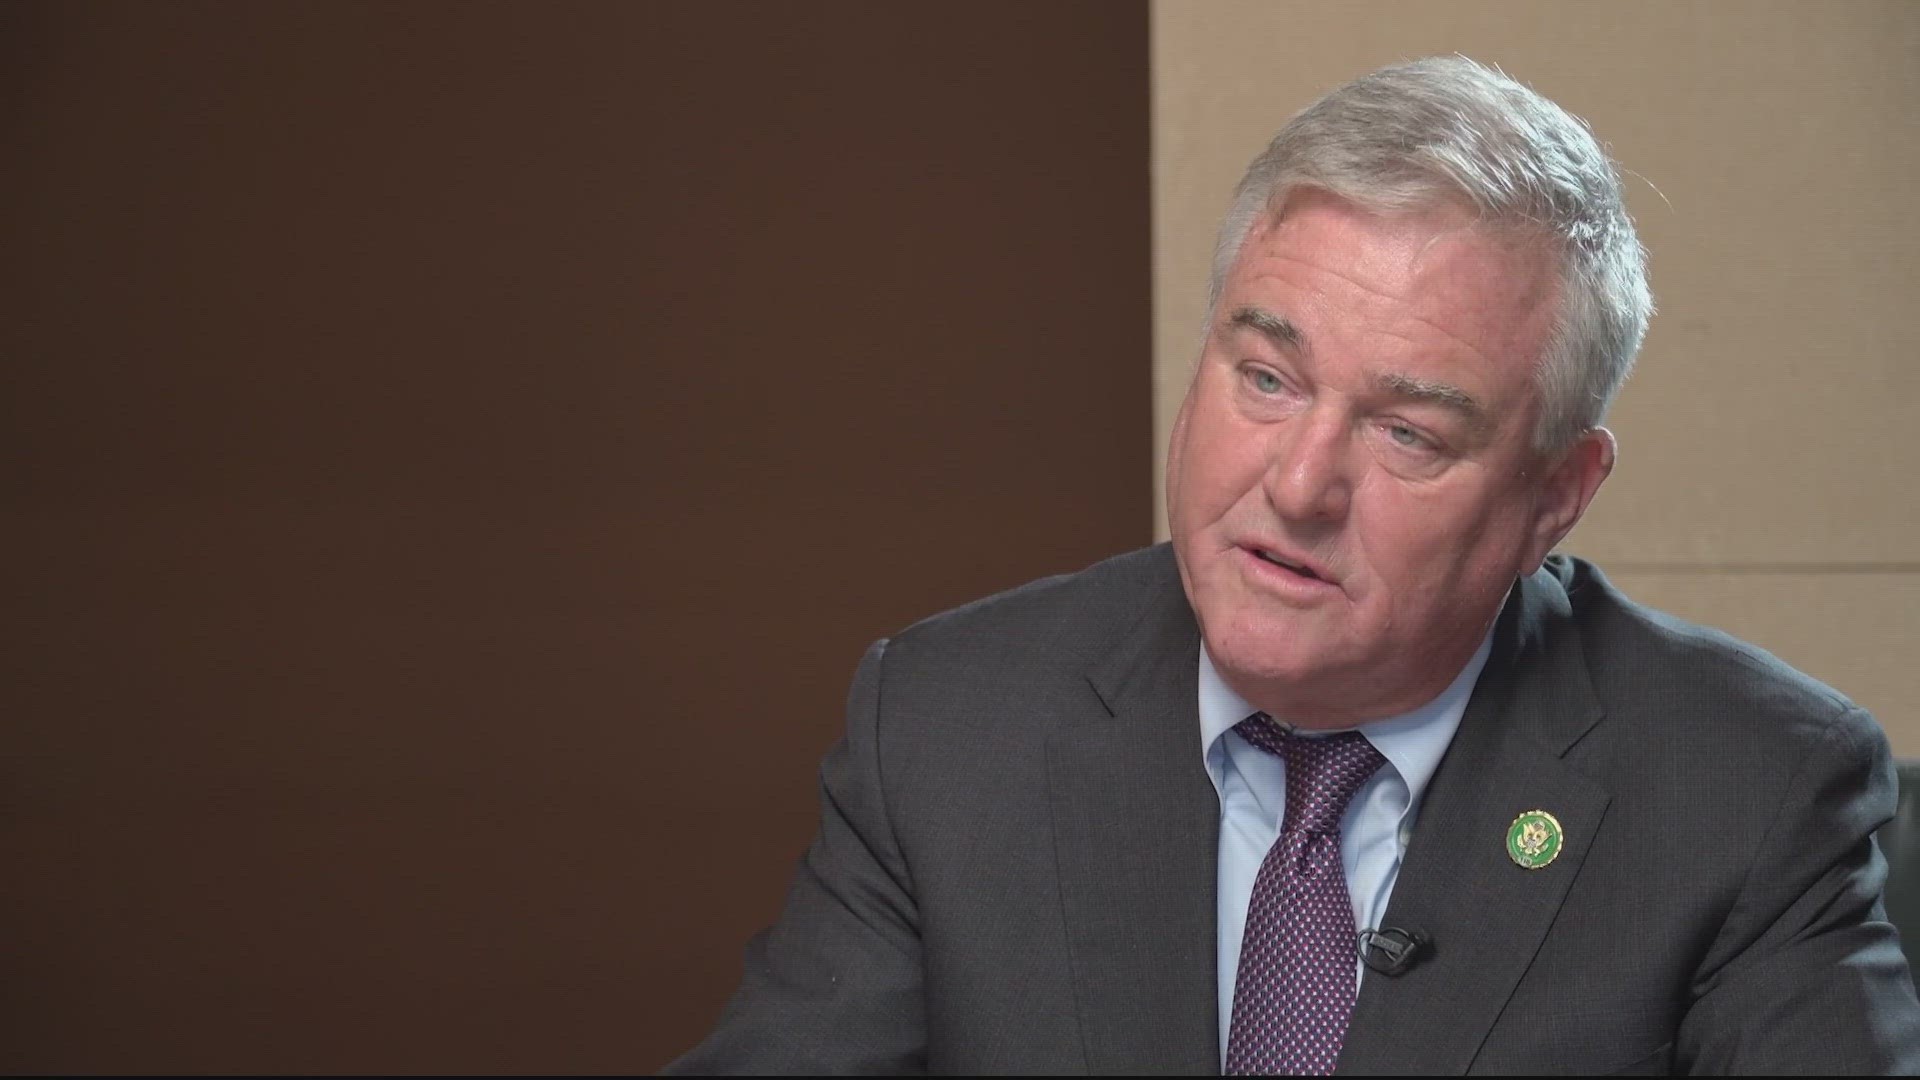 Maryland Rep. David Trone announced Thursday he will run for the U.S. Senate seat that will be opening with the retirement of Sen. Ben Cardin.